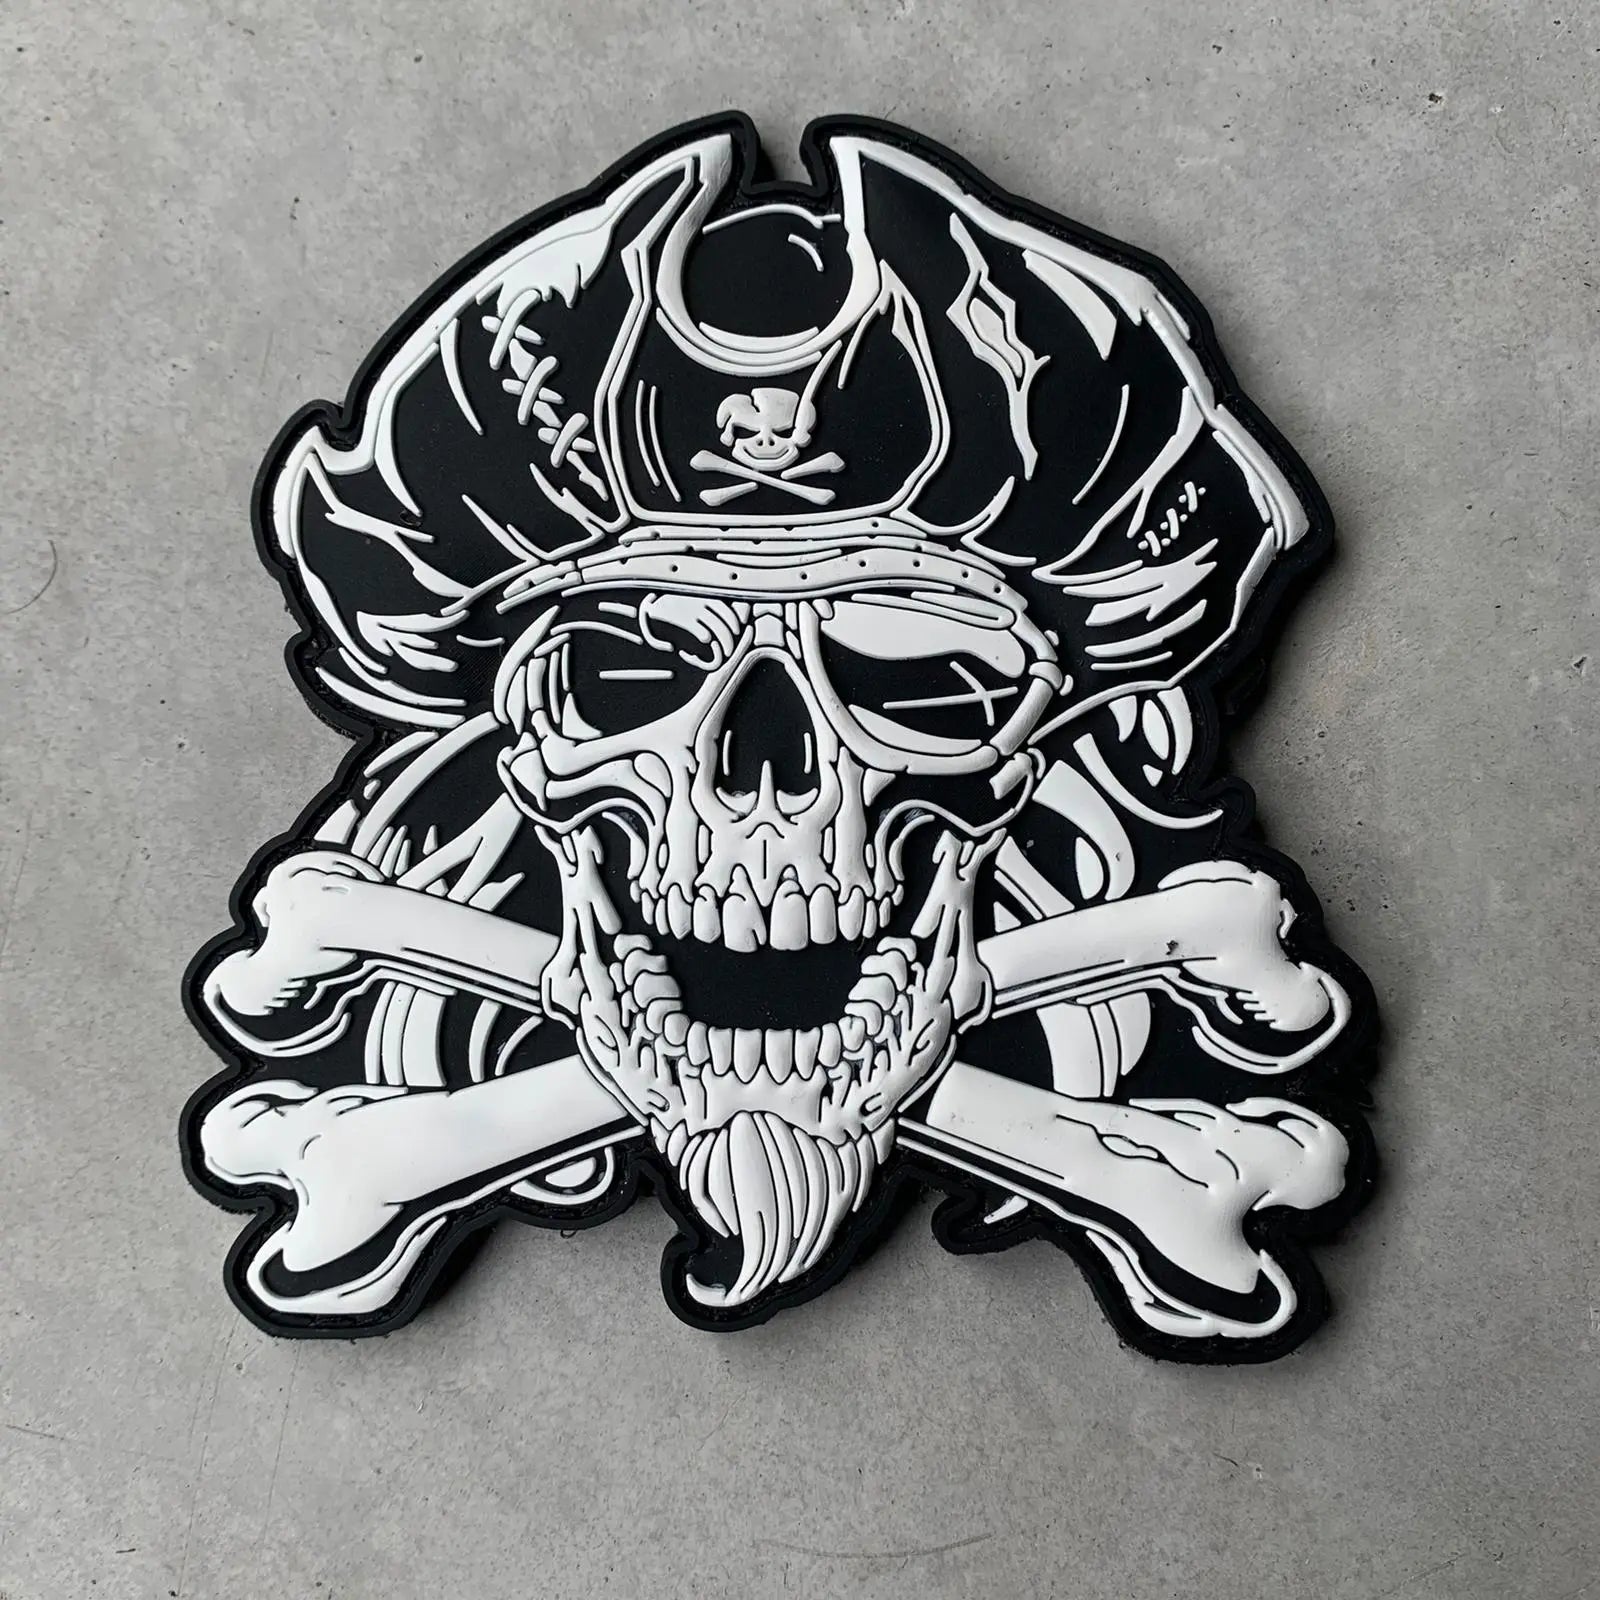 JOLLY ROGER PATCHLAB.DE